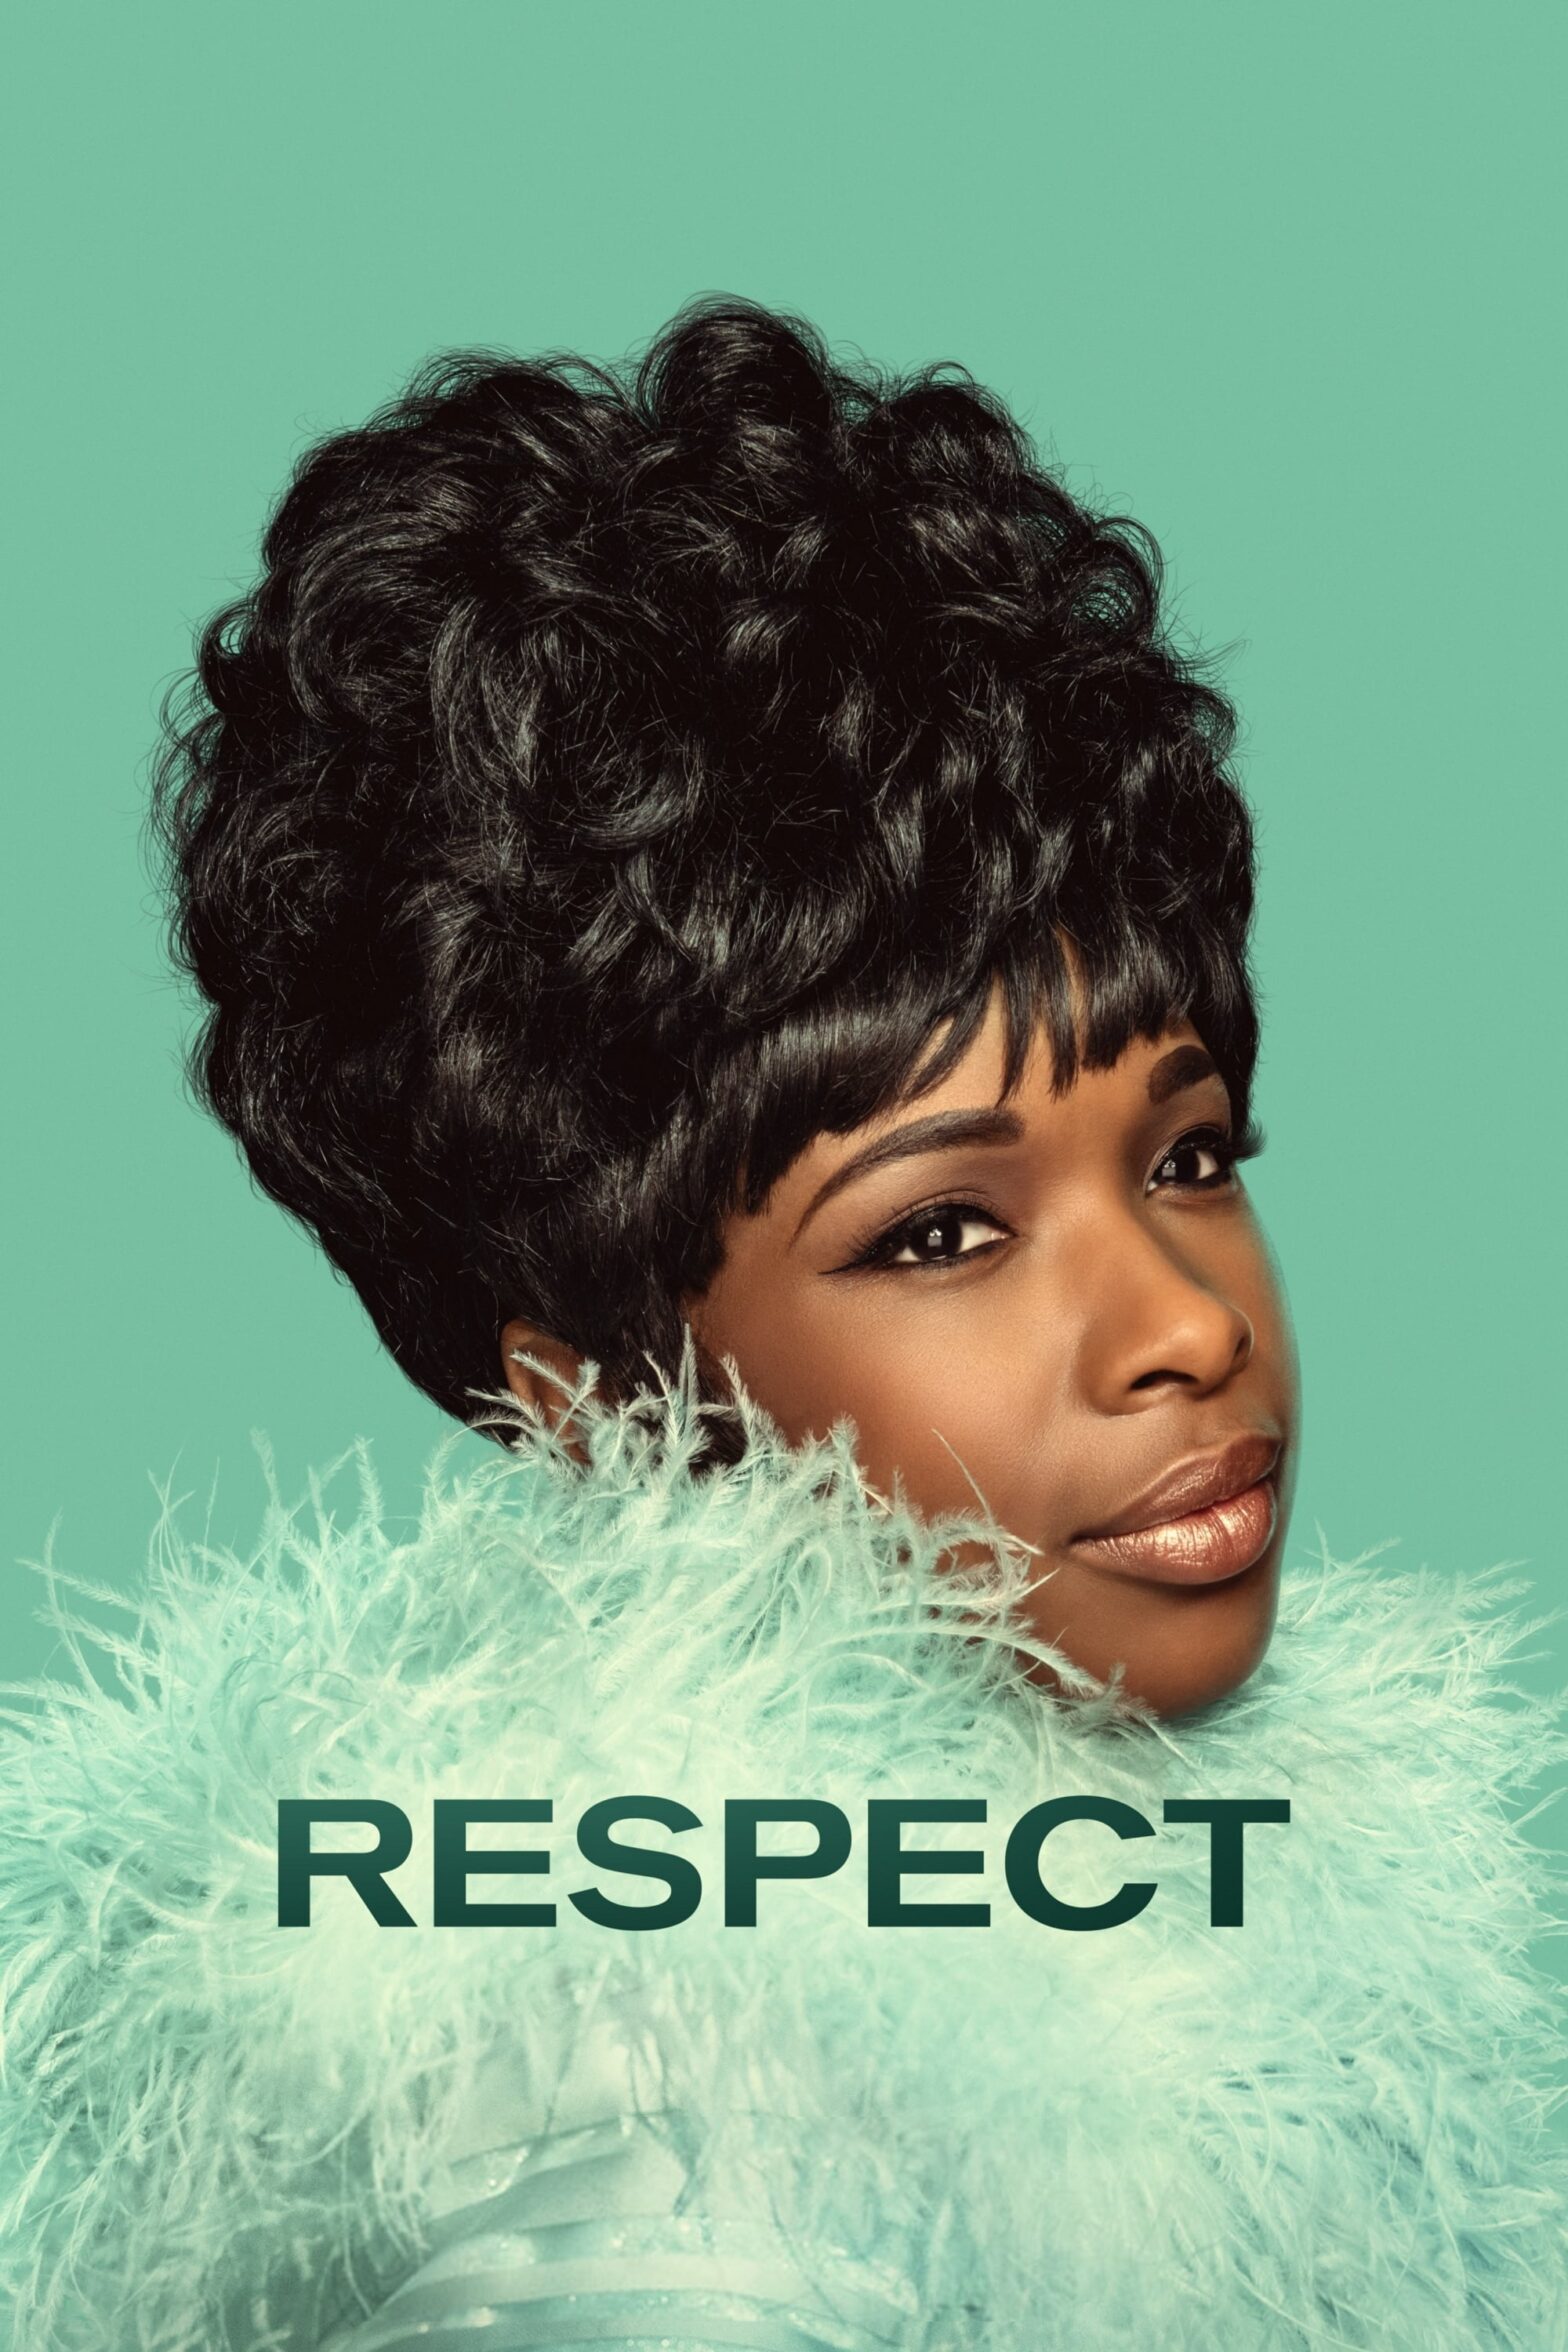 Poster for the movie "Respect"